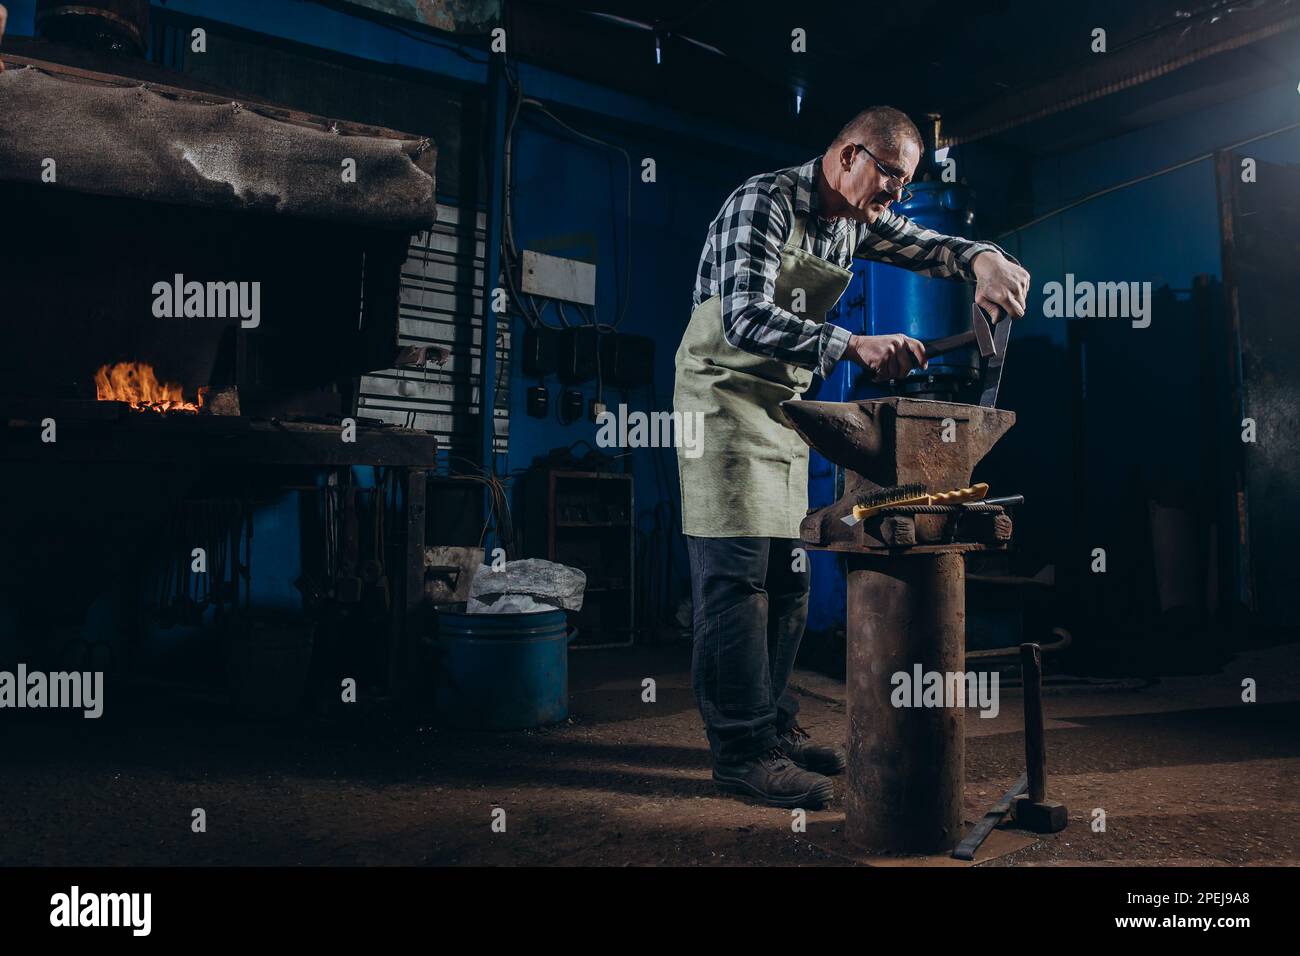 Senior an artisan blacksmith knocks with a hammer on iron to shape against the background of a burning forge. Stock Photo